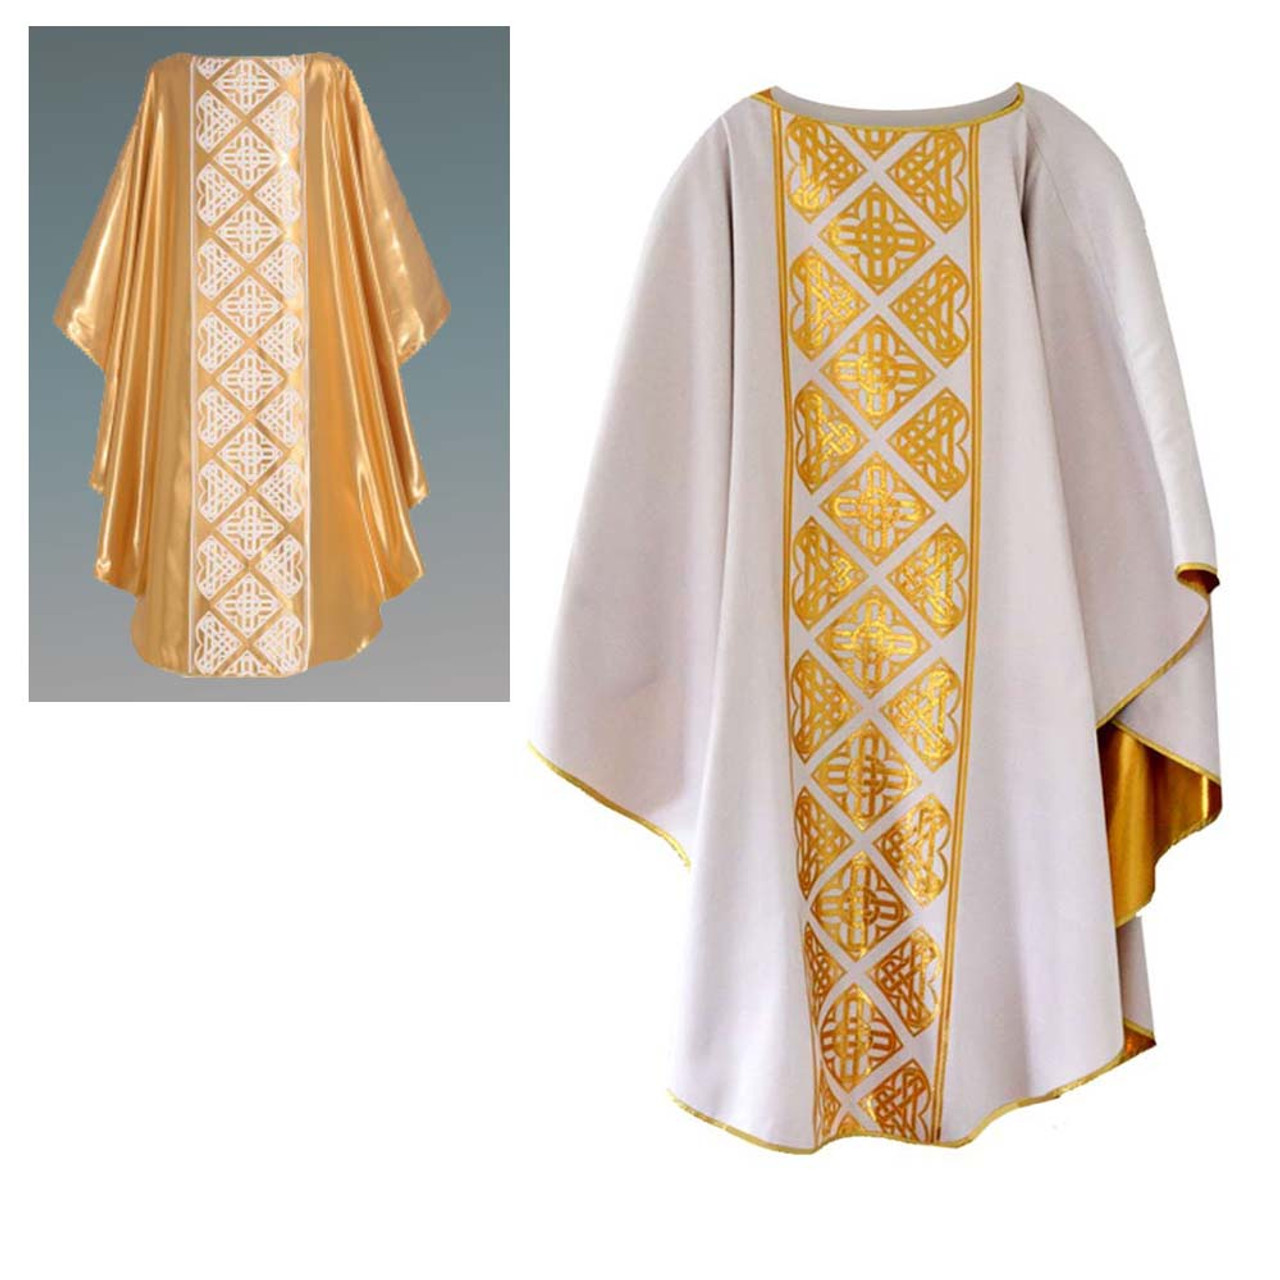 6315 Chasuble in Gold/White from Houssard